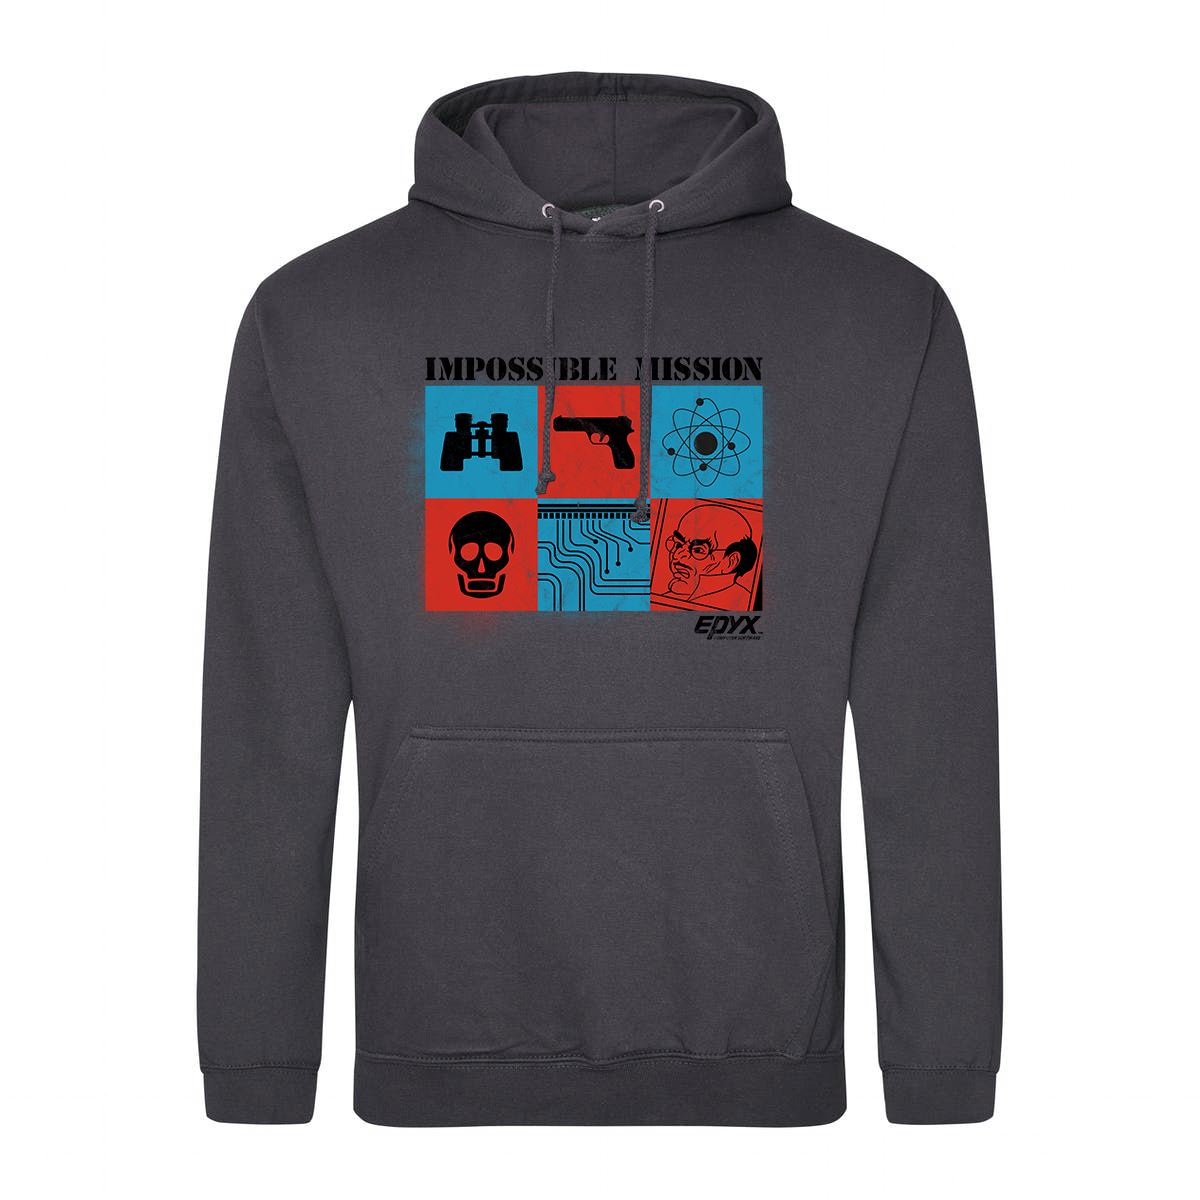 Impossible Mission Retro Gaming Hoodie Hoodie Seven Squared Small 36" Chest Storm Grey 